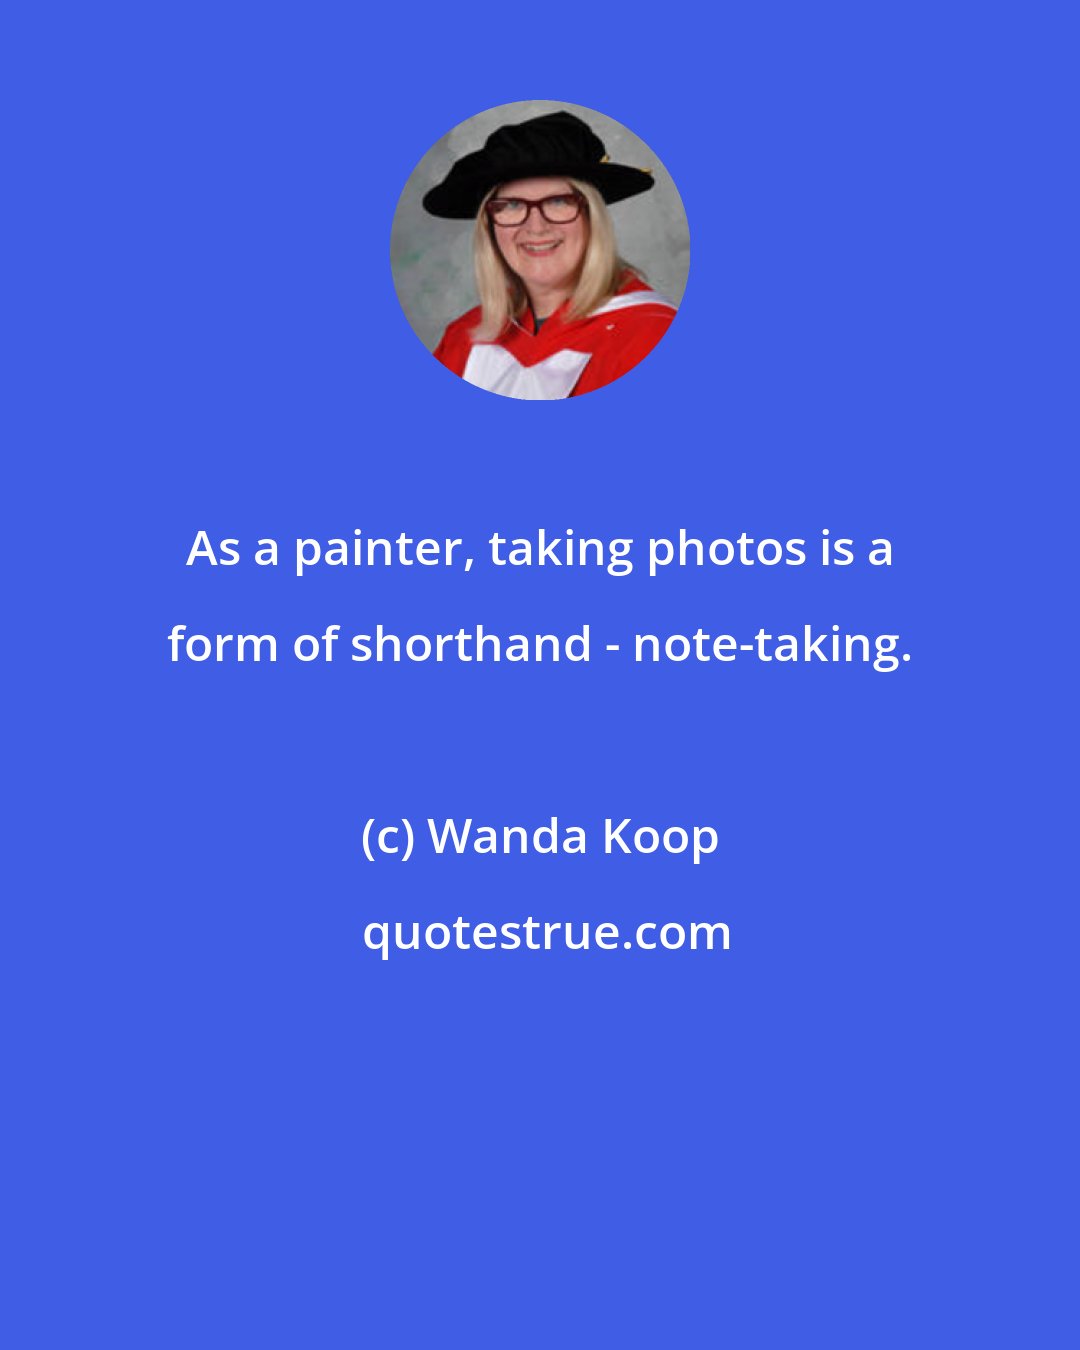 Wanda Koop: As a painter, taking photos is a form of shorthand - note-taking.